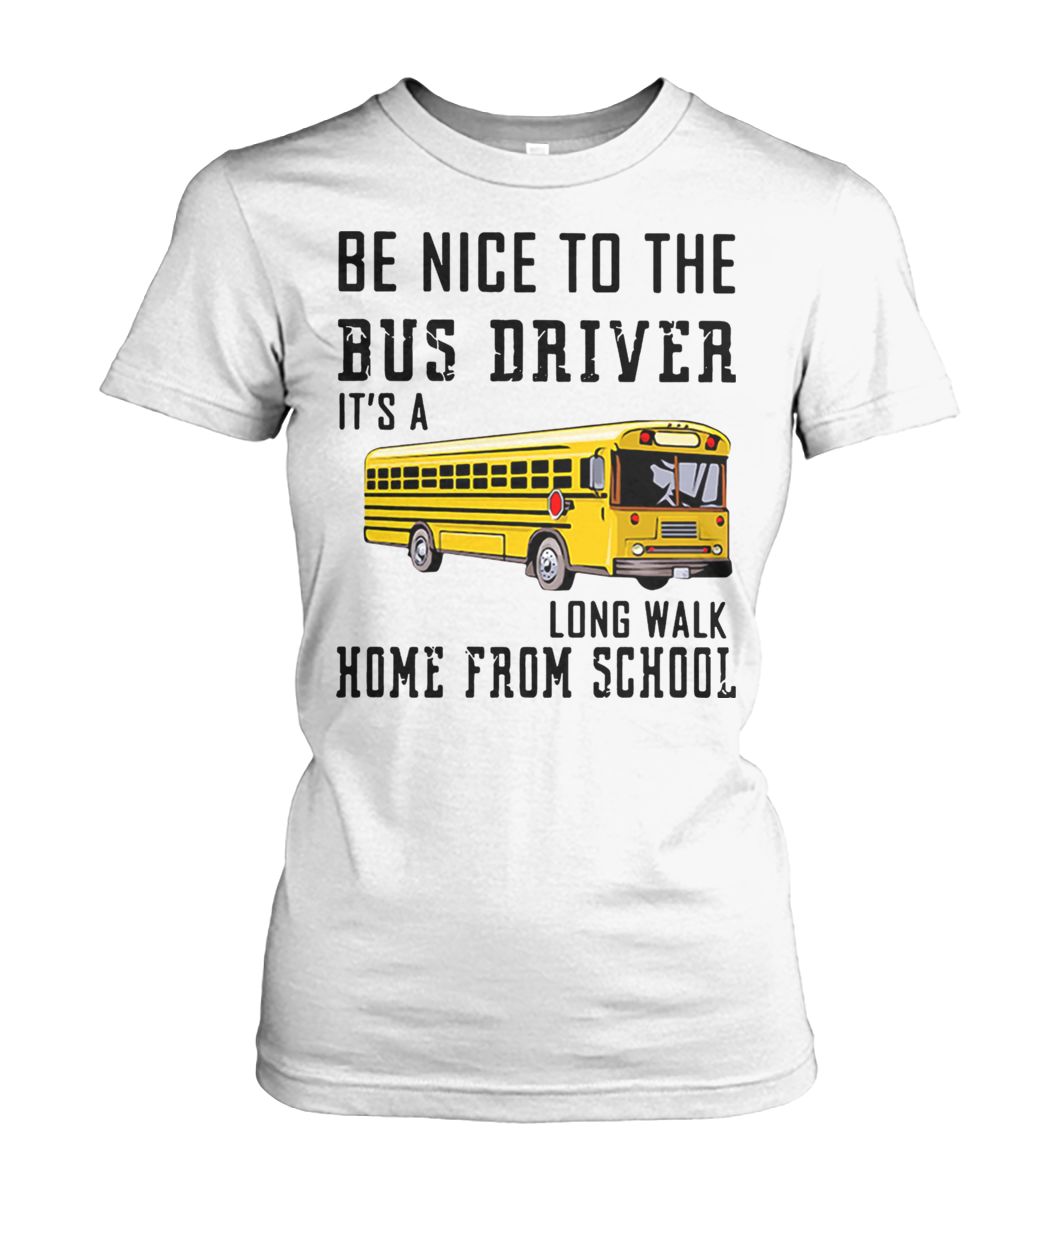 Be nice to the bus driver it's a long walk home from school women's crew tee